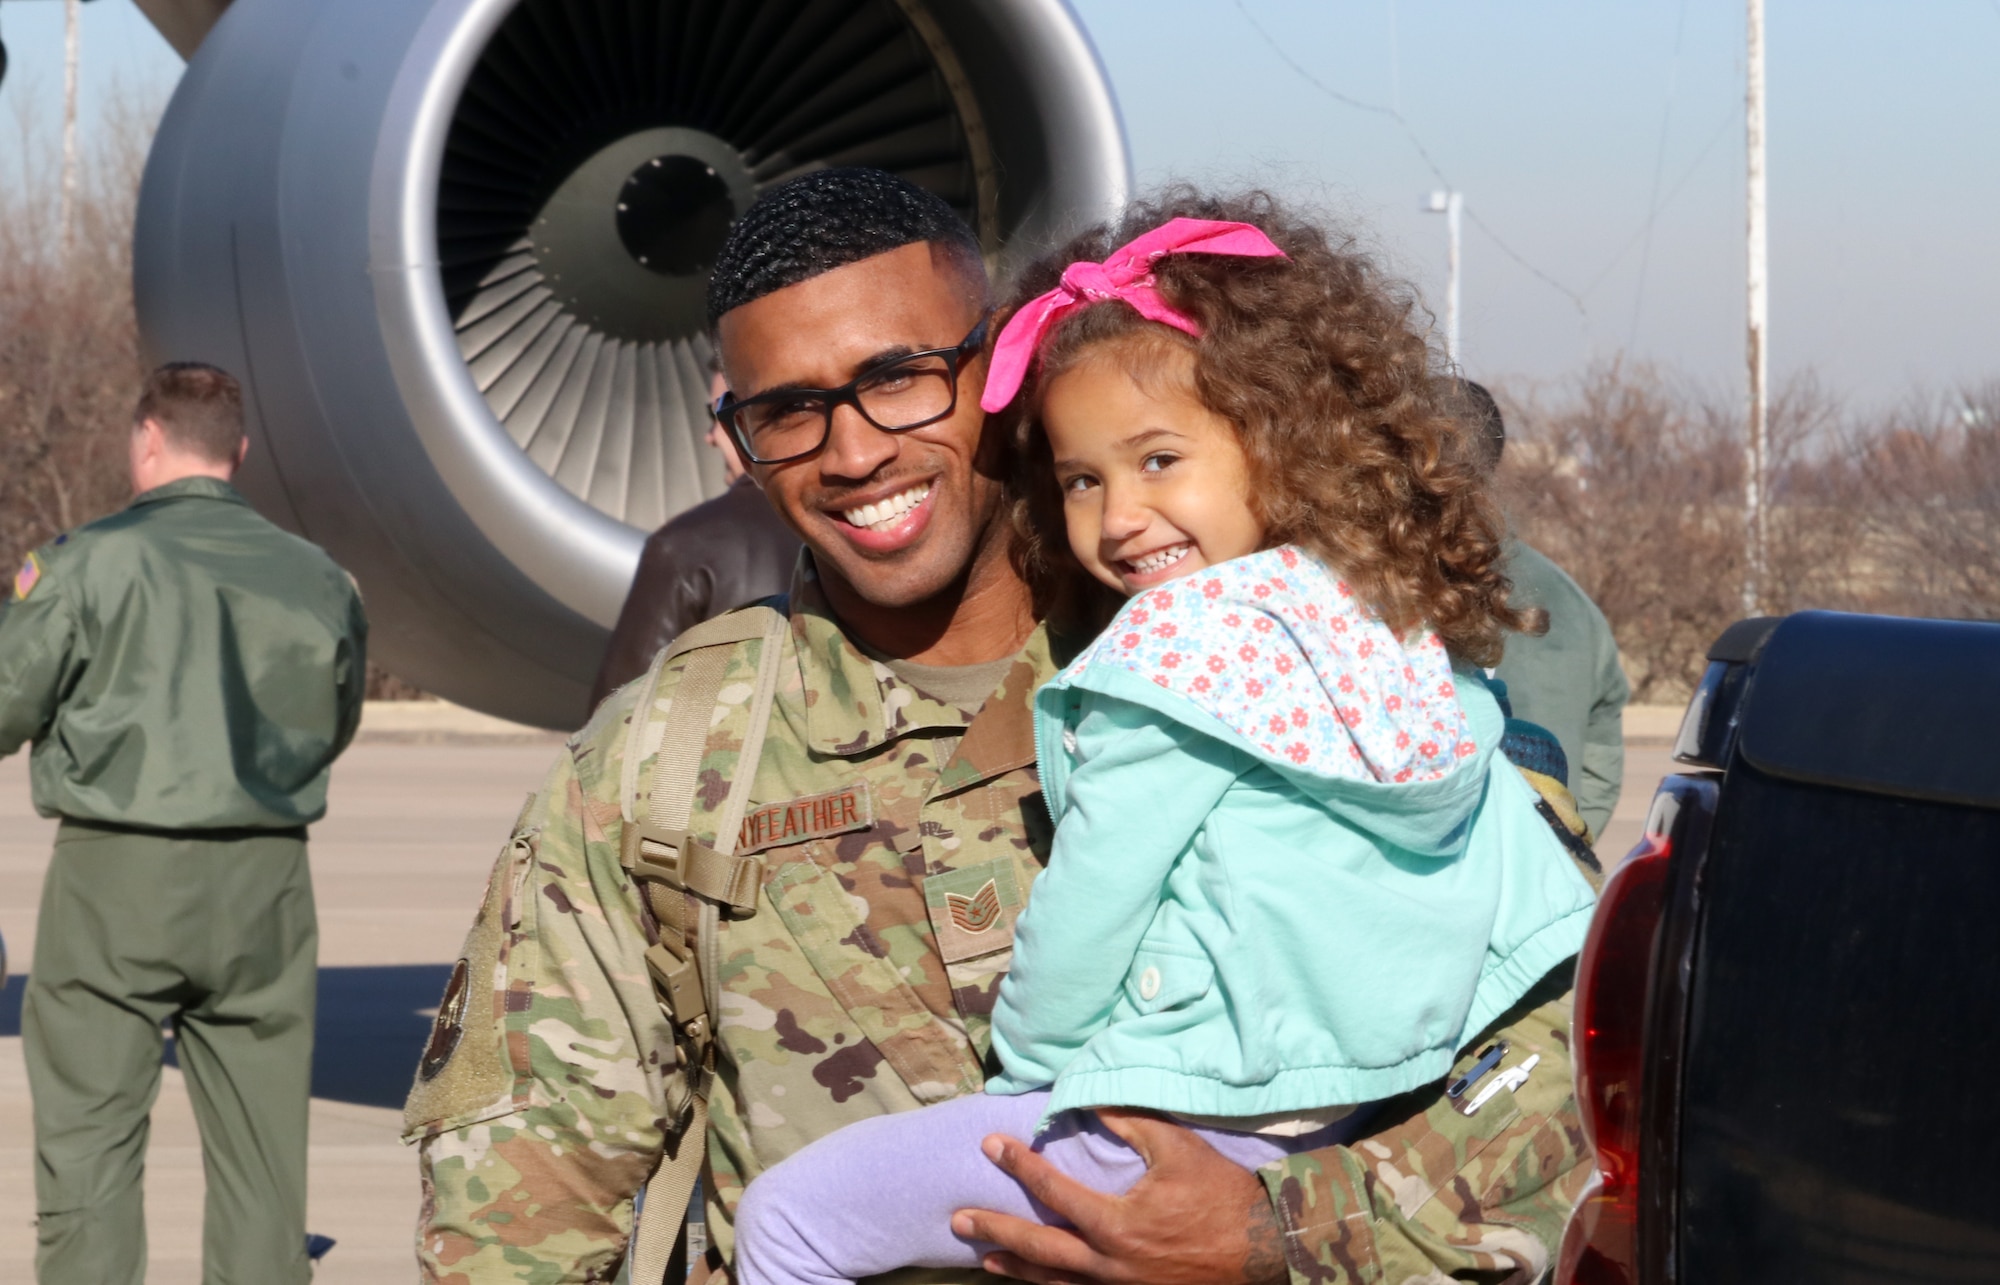 Tech Sgt. Leon Pennyfeather, 507th Operations Support Squadron, returns from a deployment to Southwest Asia Nov. 25, 2019, at Tinker Air Force Base, Oklahoma. (U.S. Air Force photo by Senior Airman Mary Begy)